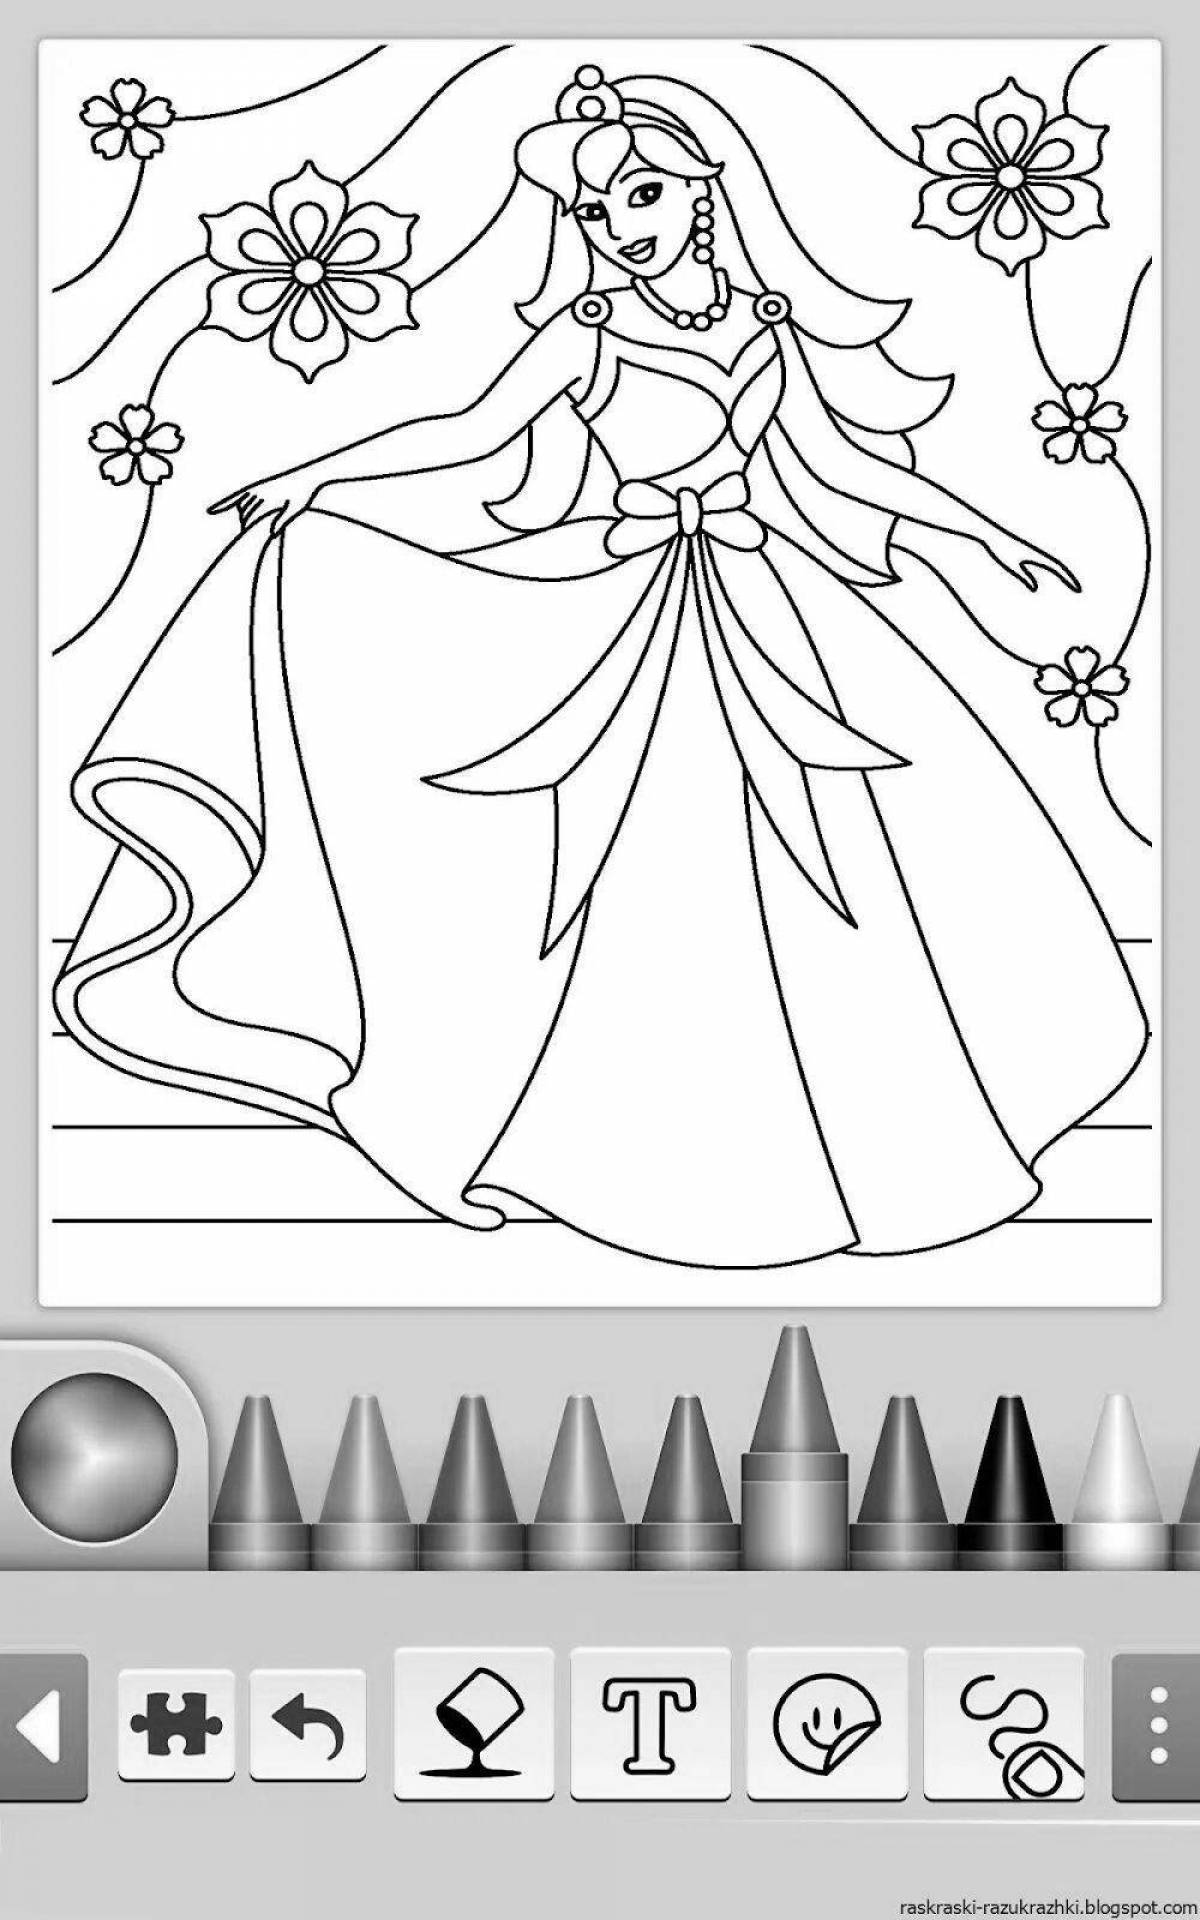 Colorable coloring page turn on для девочек